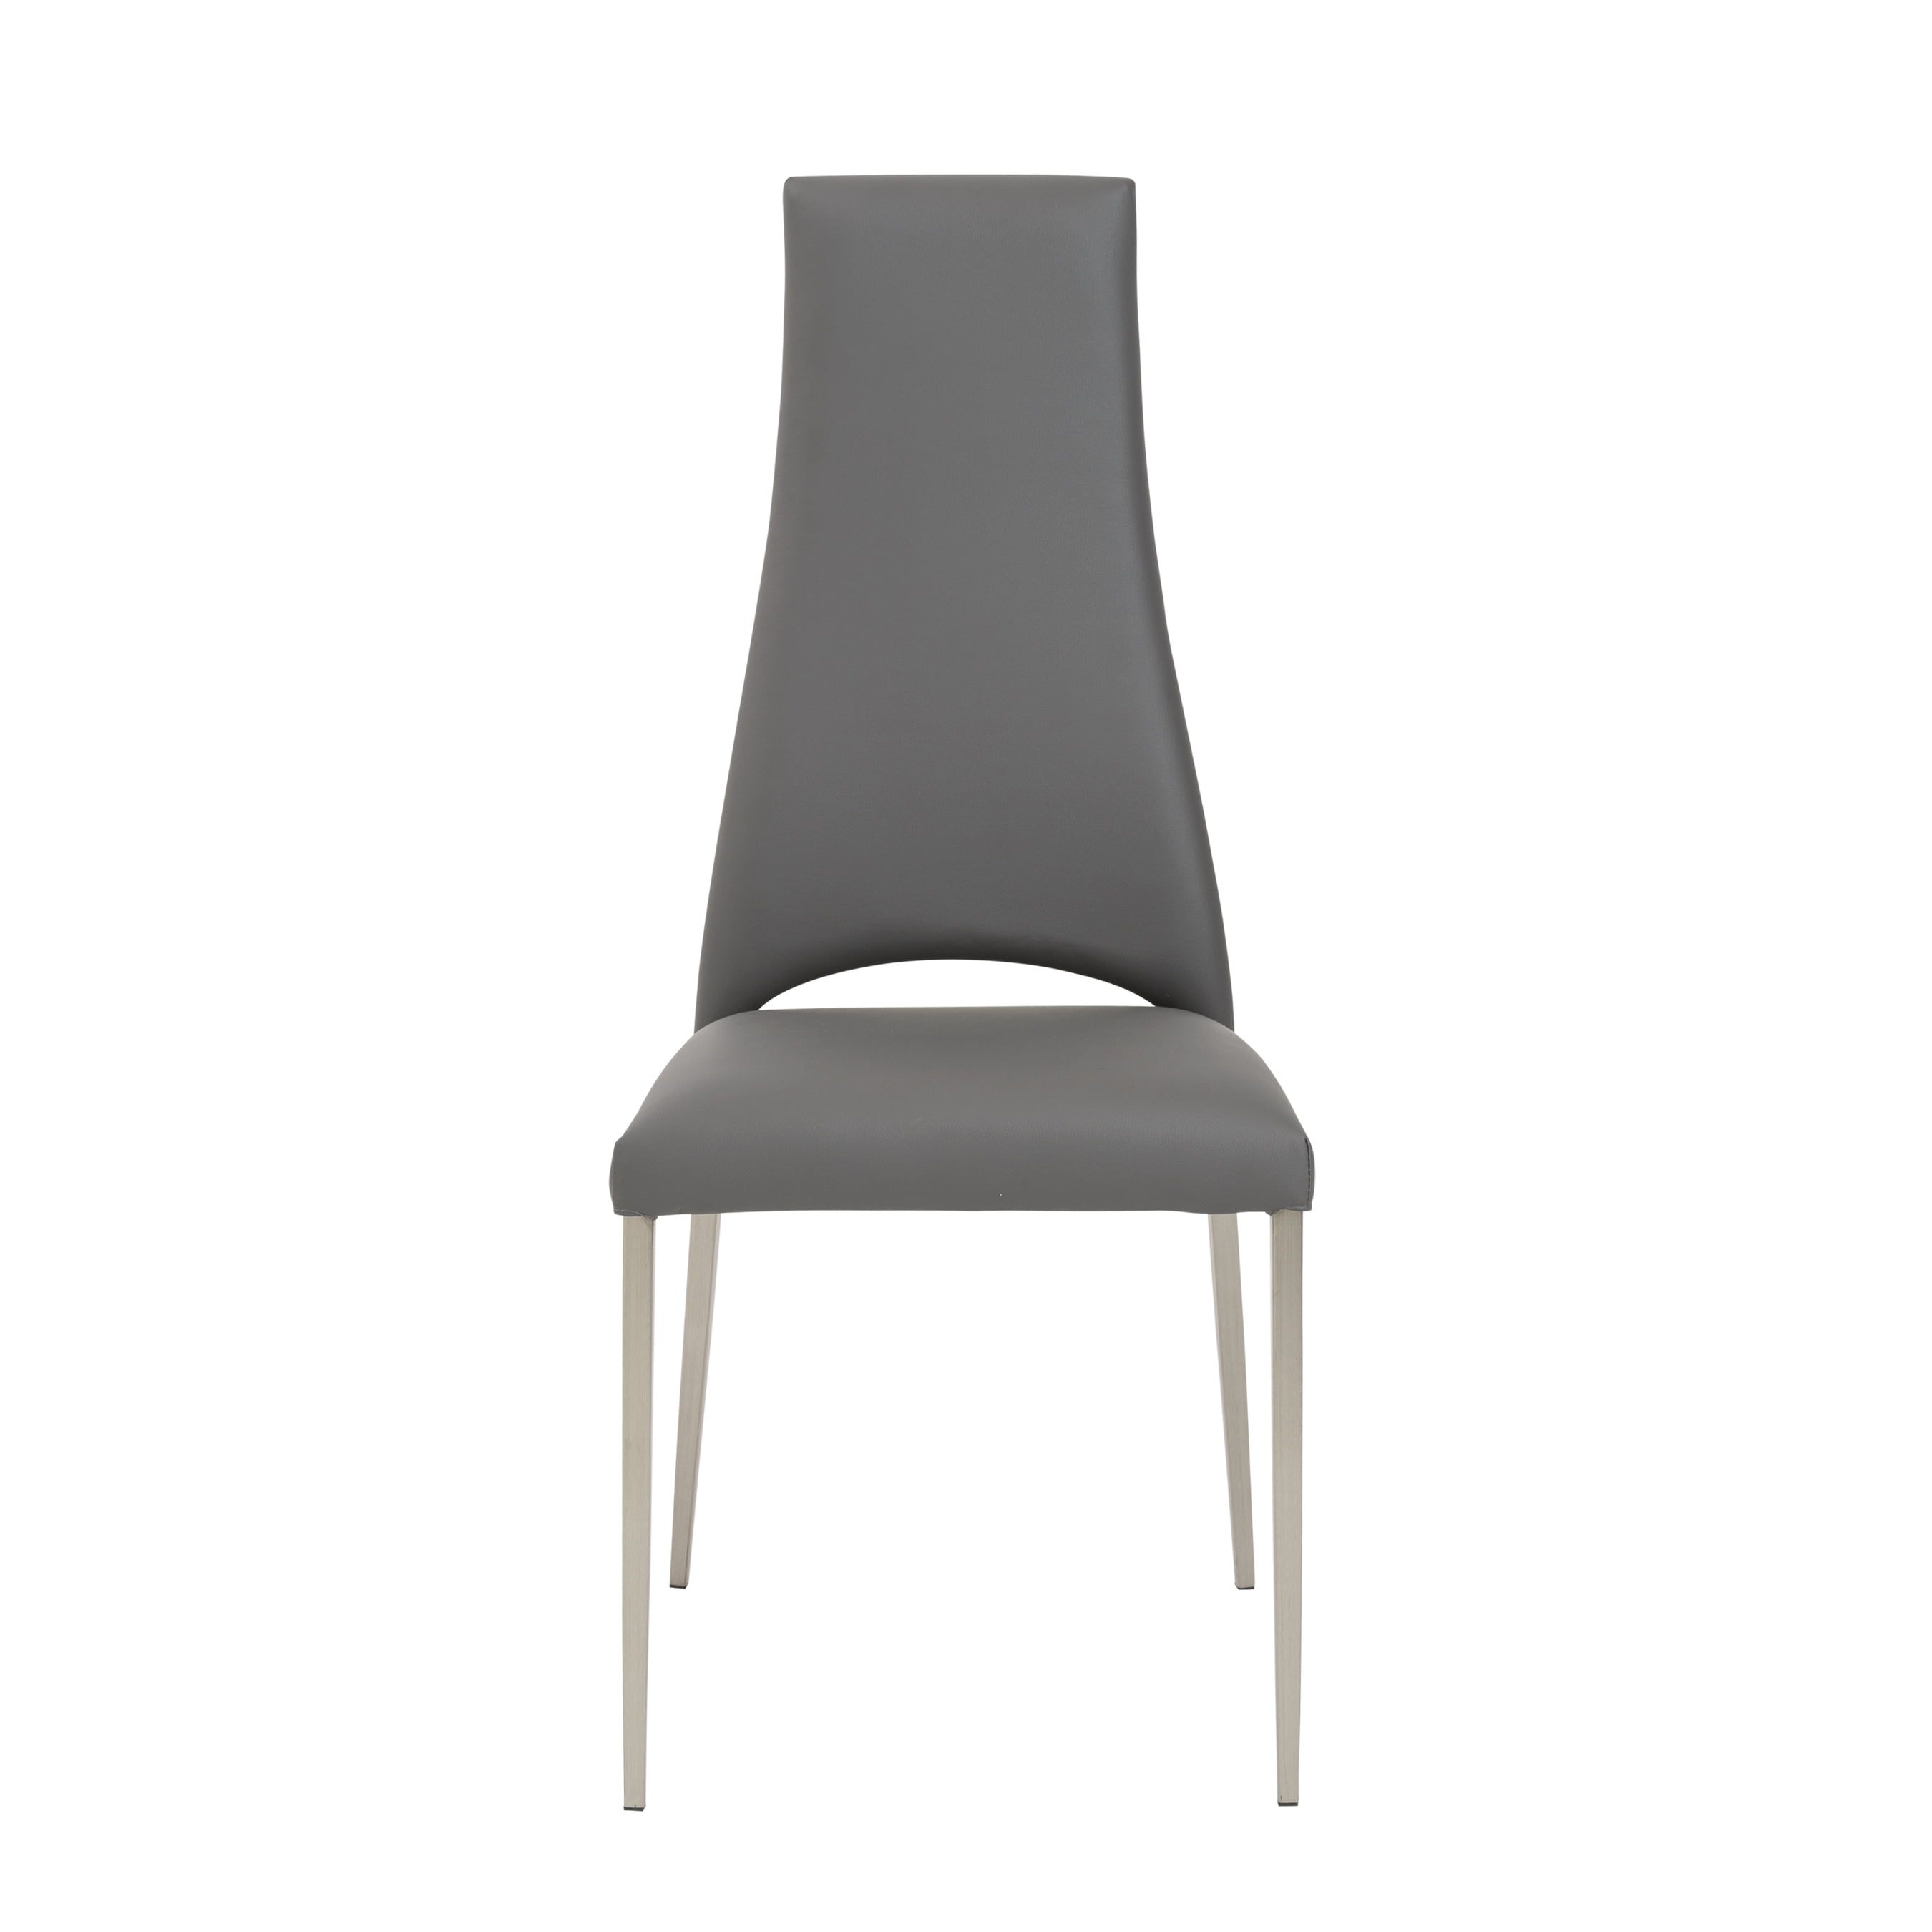 Tara Dining Chair in Gray Leatherette with Brushed Stainless Steel Legs Dining Chairs With Stainless Steel Legs